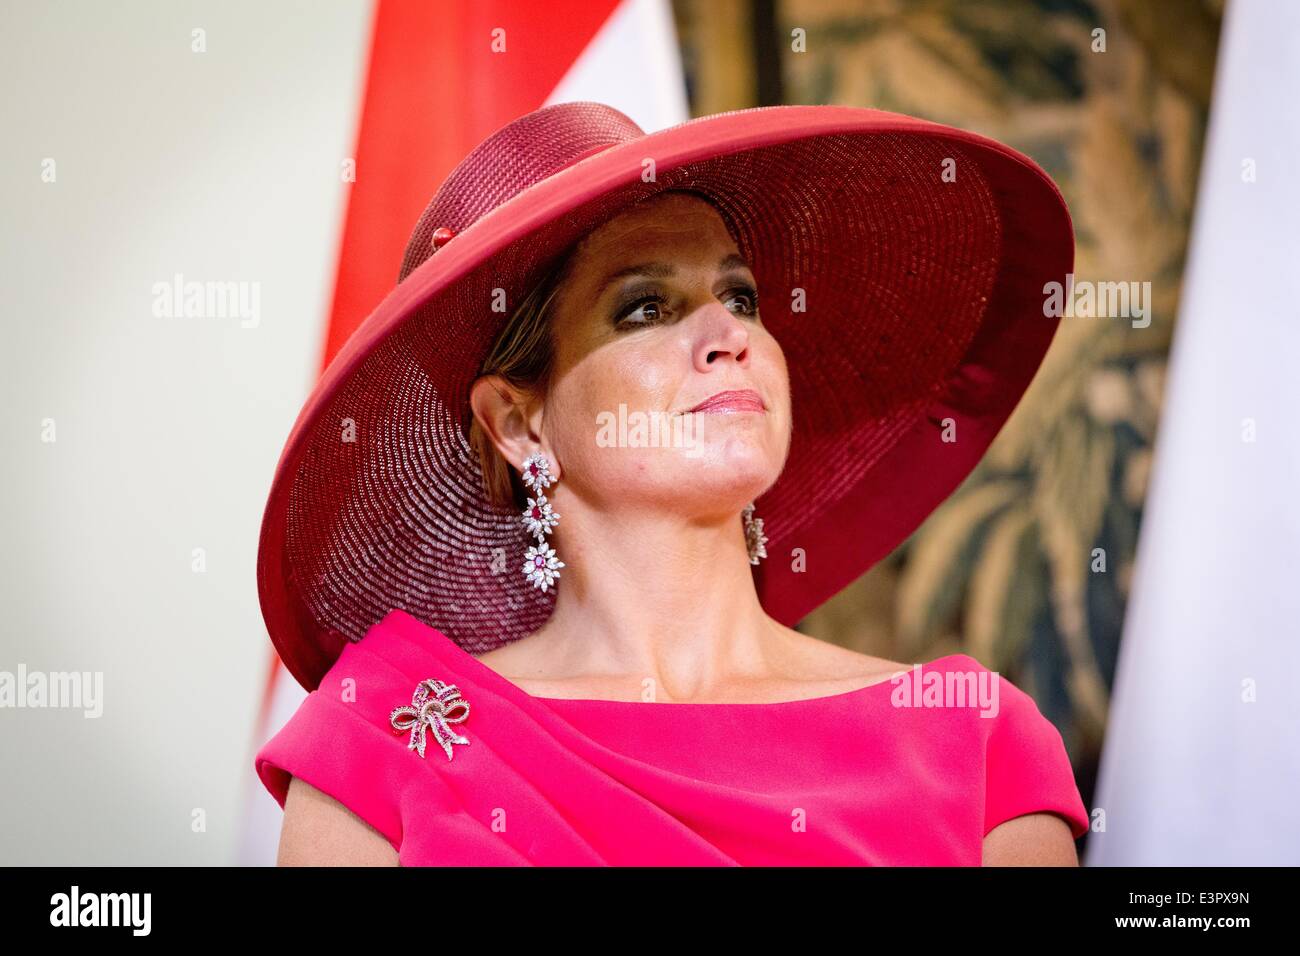 Warsaw, Poland. 24th June, 2014. Dutch Queen Maxima attending a press conference at the Belweder Palace in Warsaw, Poland, 24 June 2014. Photo: Patrick van Katwijk -NO WIRE SERVICE-/dpa/Alamy Live News Stock Photo